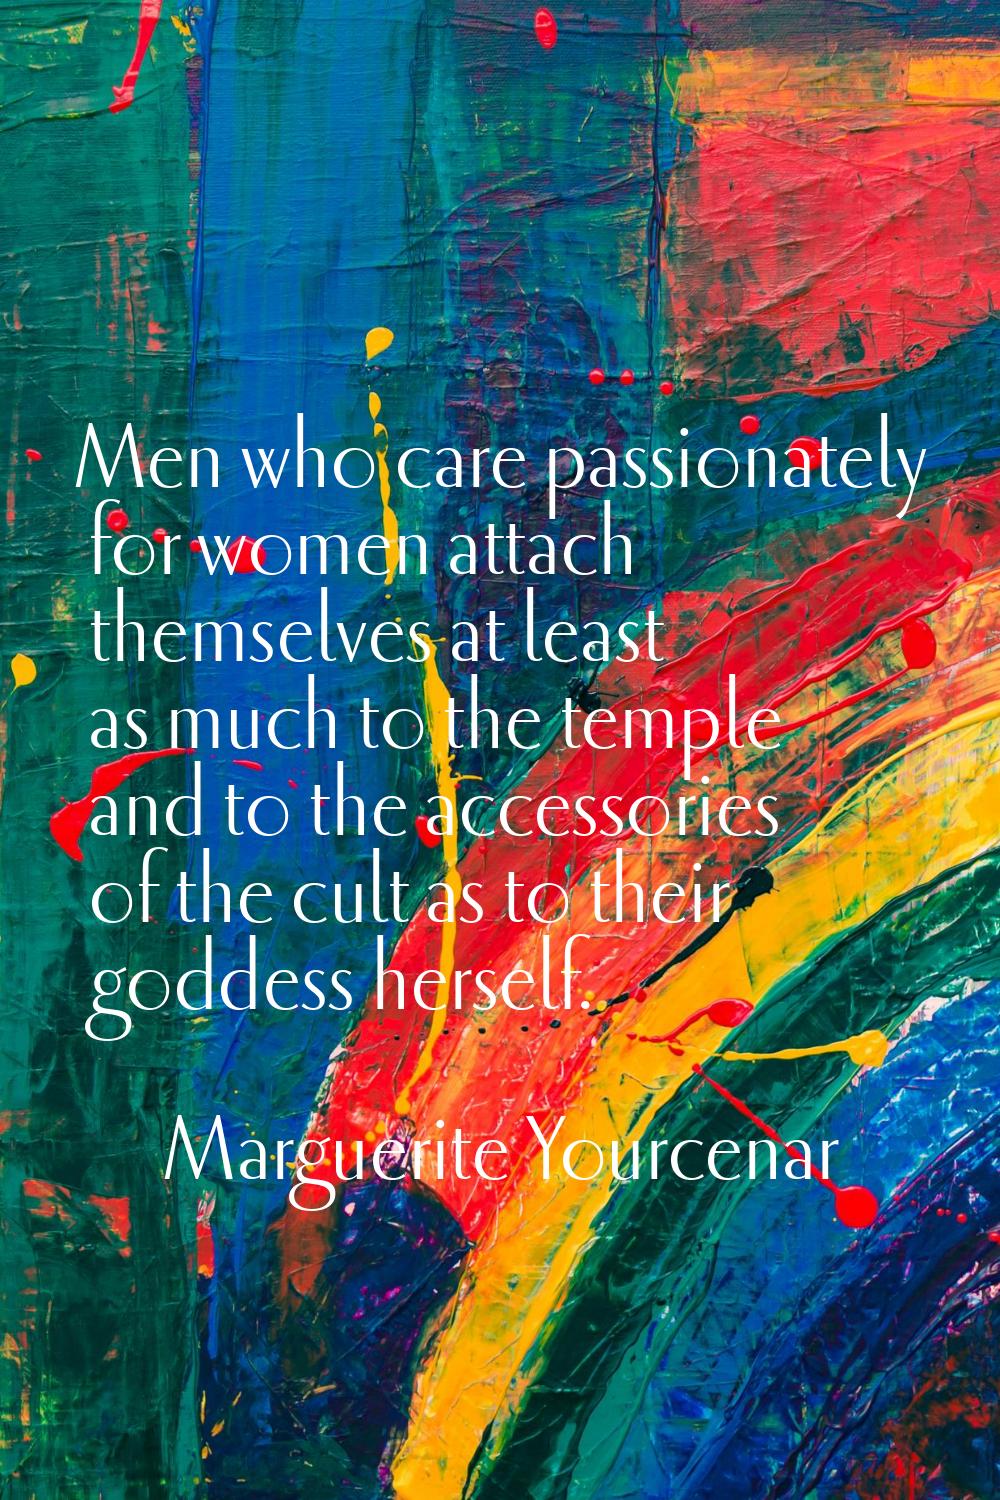 Men who care passionately for women attach themselves at least as much to the temple and to the acc